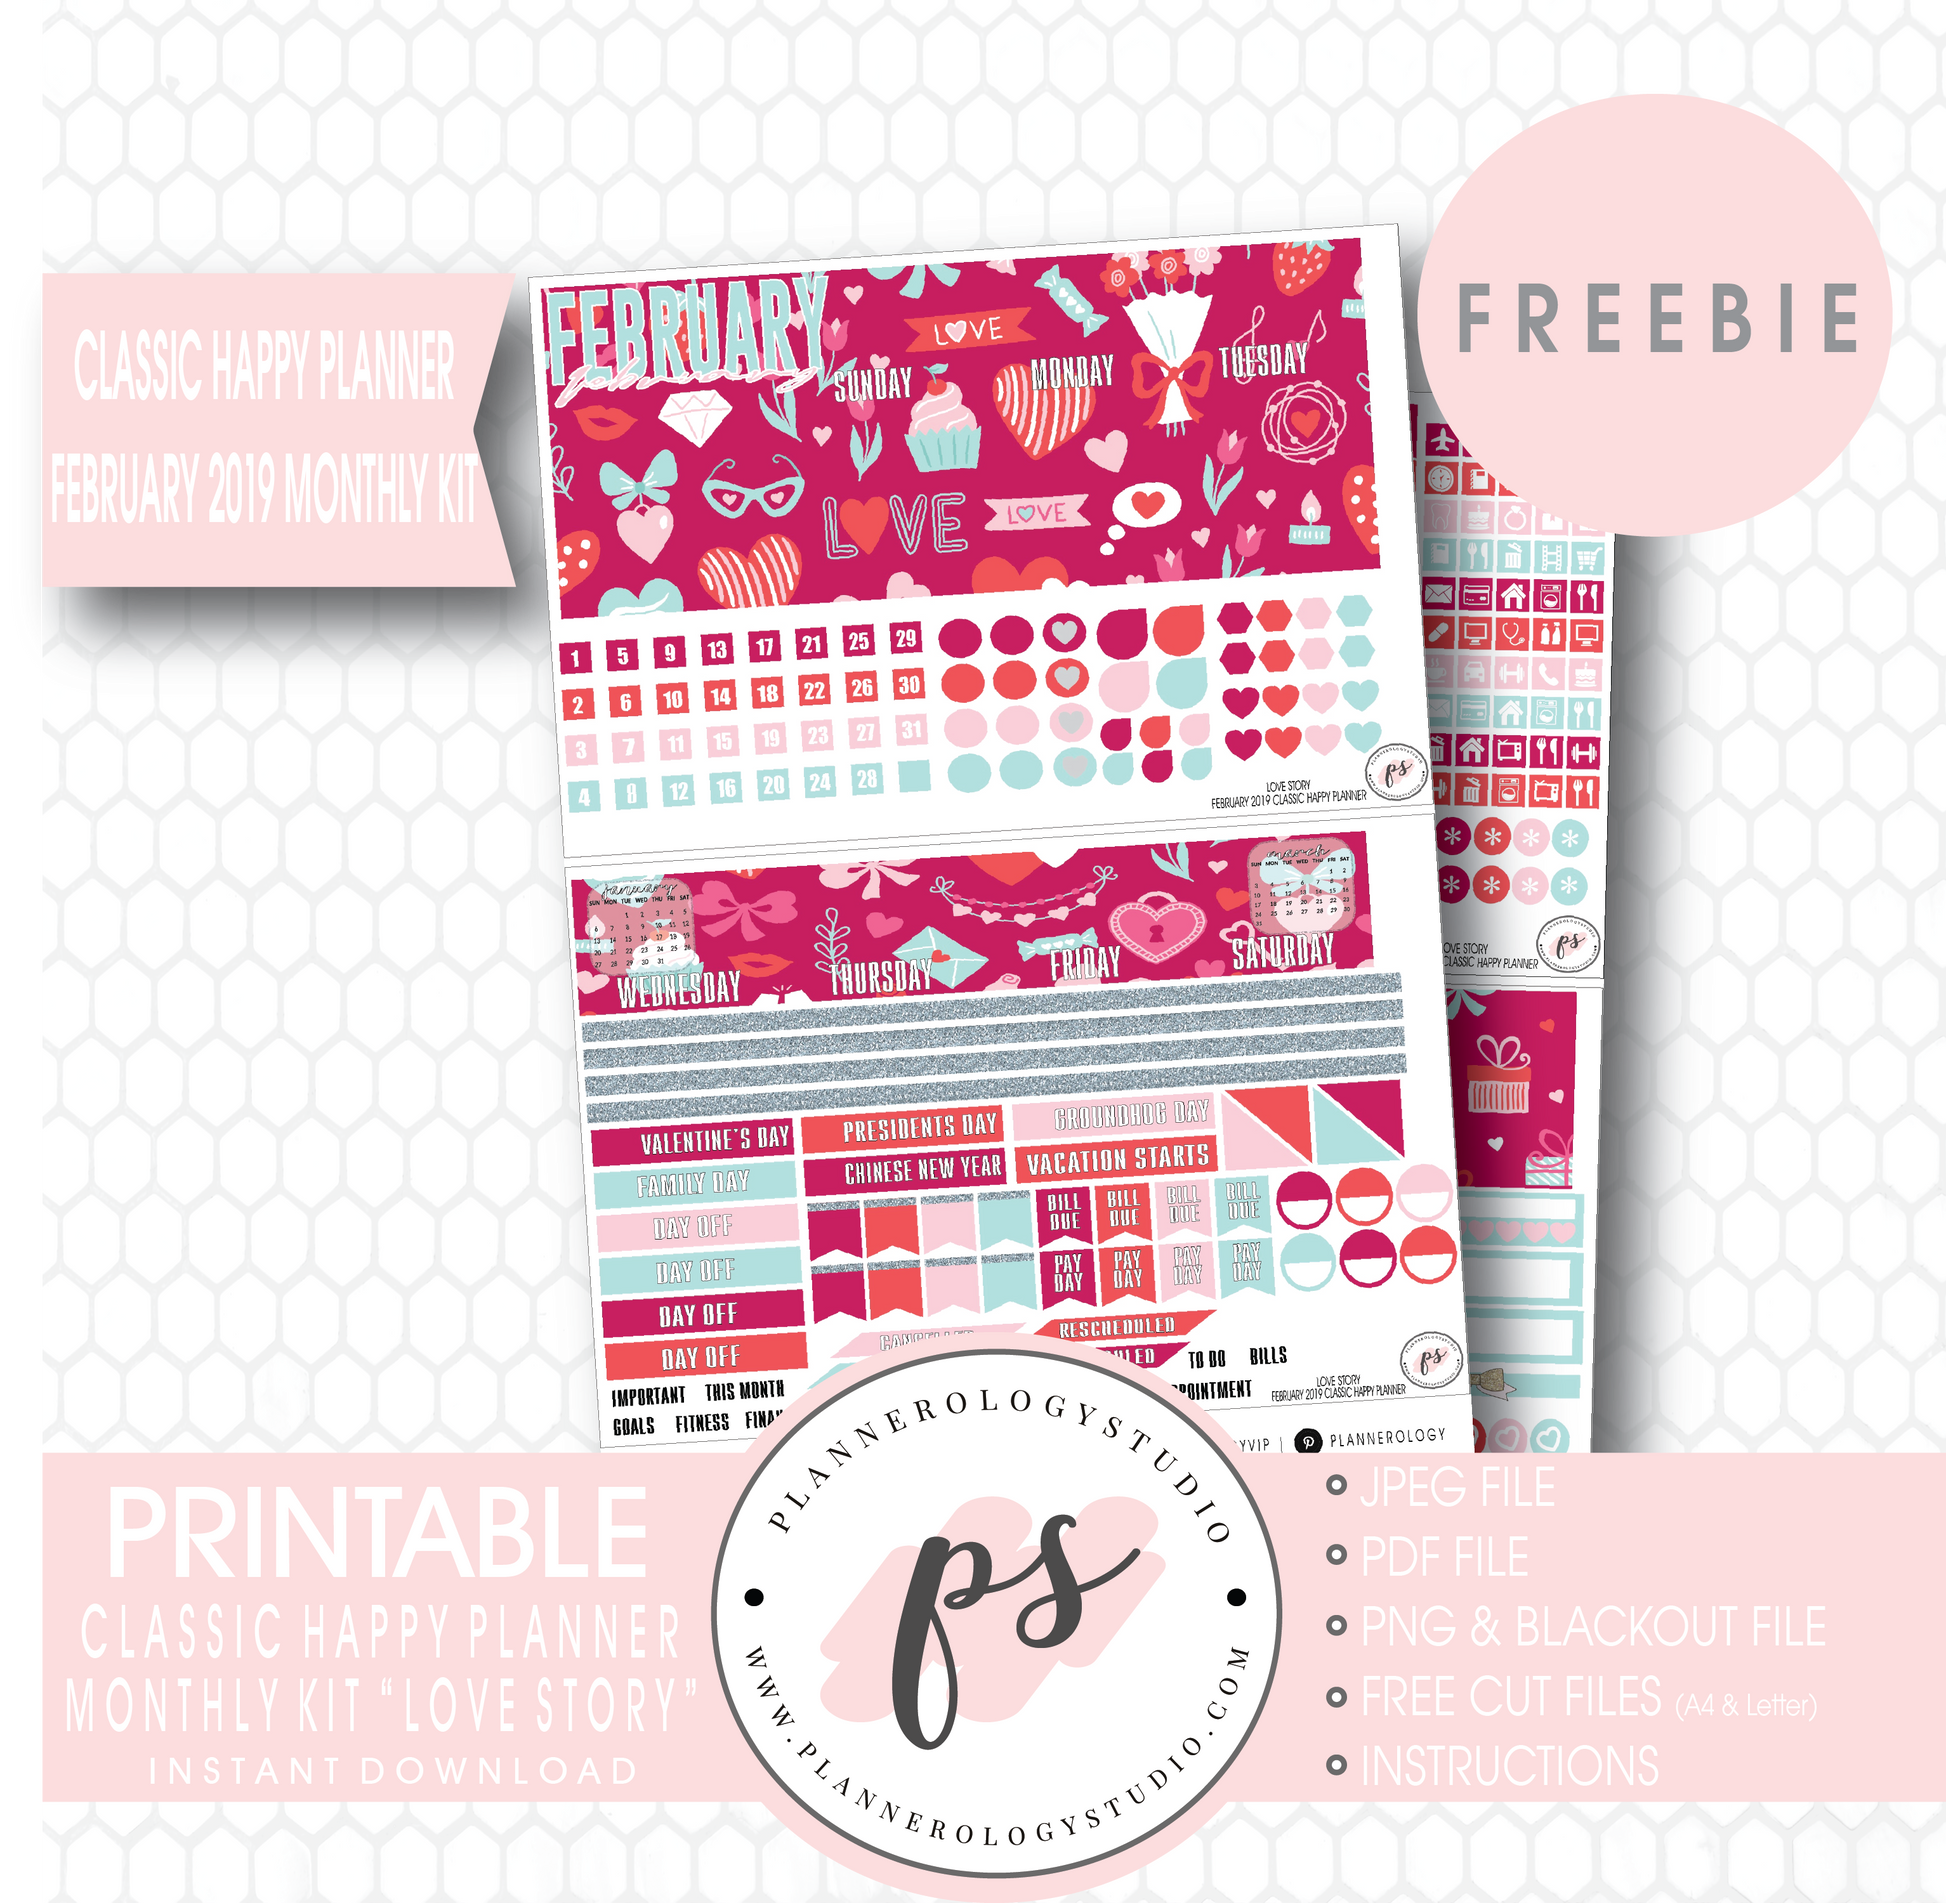 Love Story (Valentine's Day) Classic Happy Planner February 2019 Monthly Kit Digital Printable Planner Stickers (PDF/JPG/PNG/Cut File Freebie) - Plannerologystudio